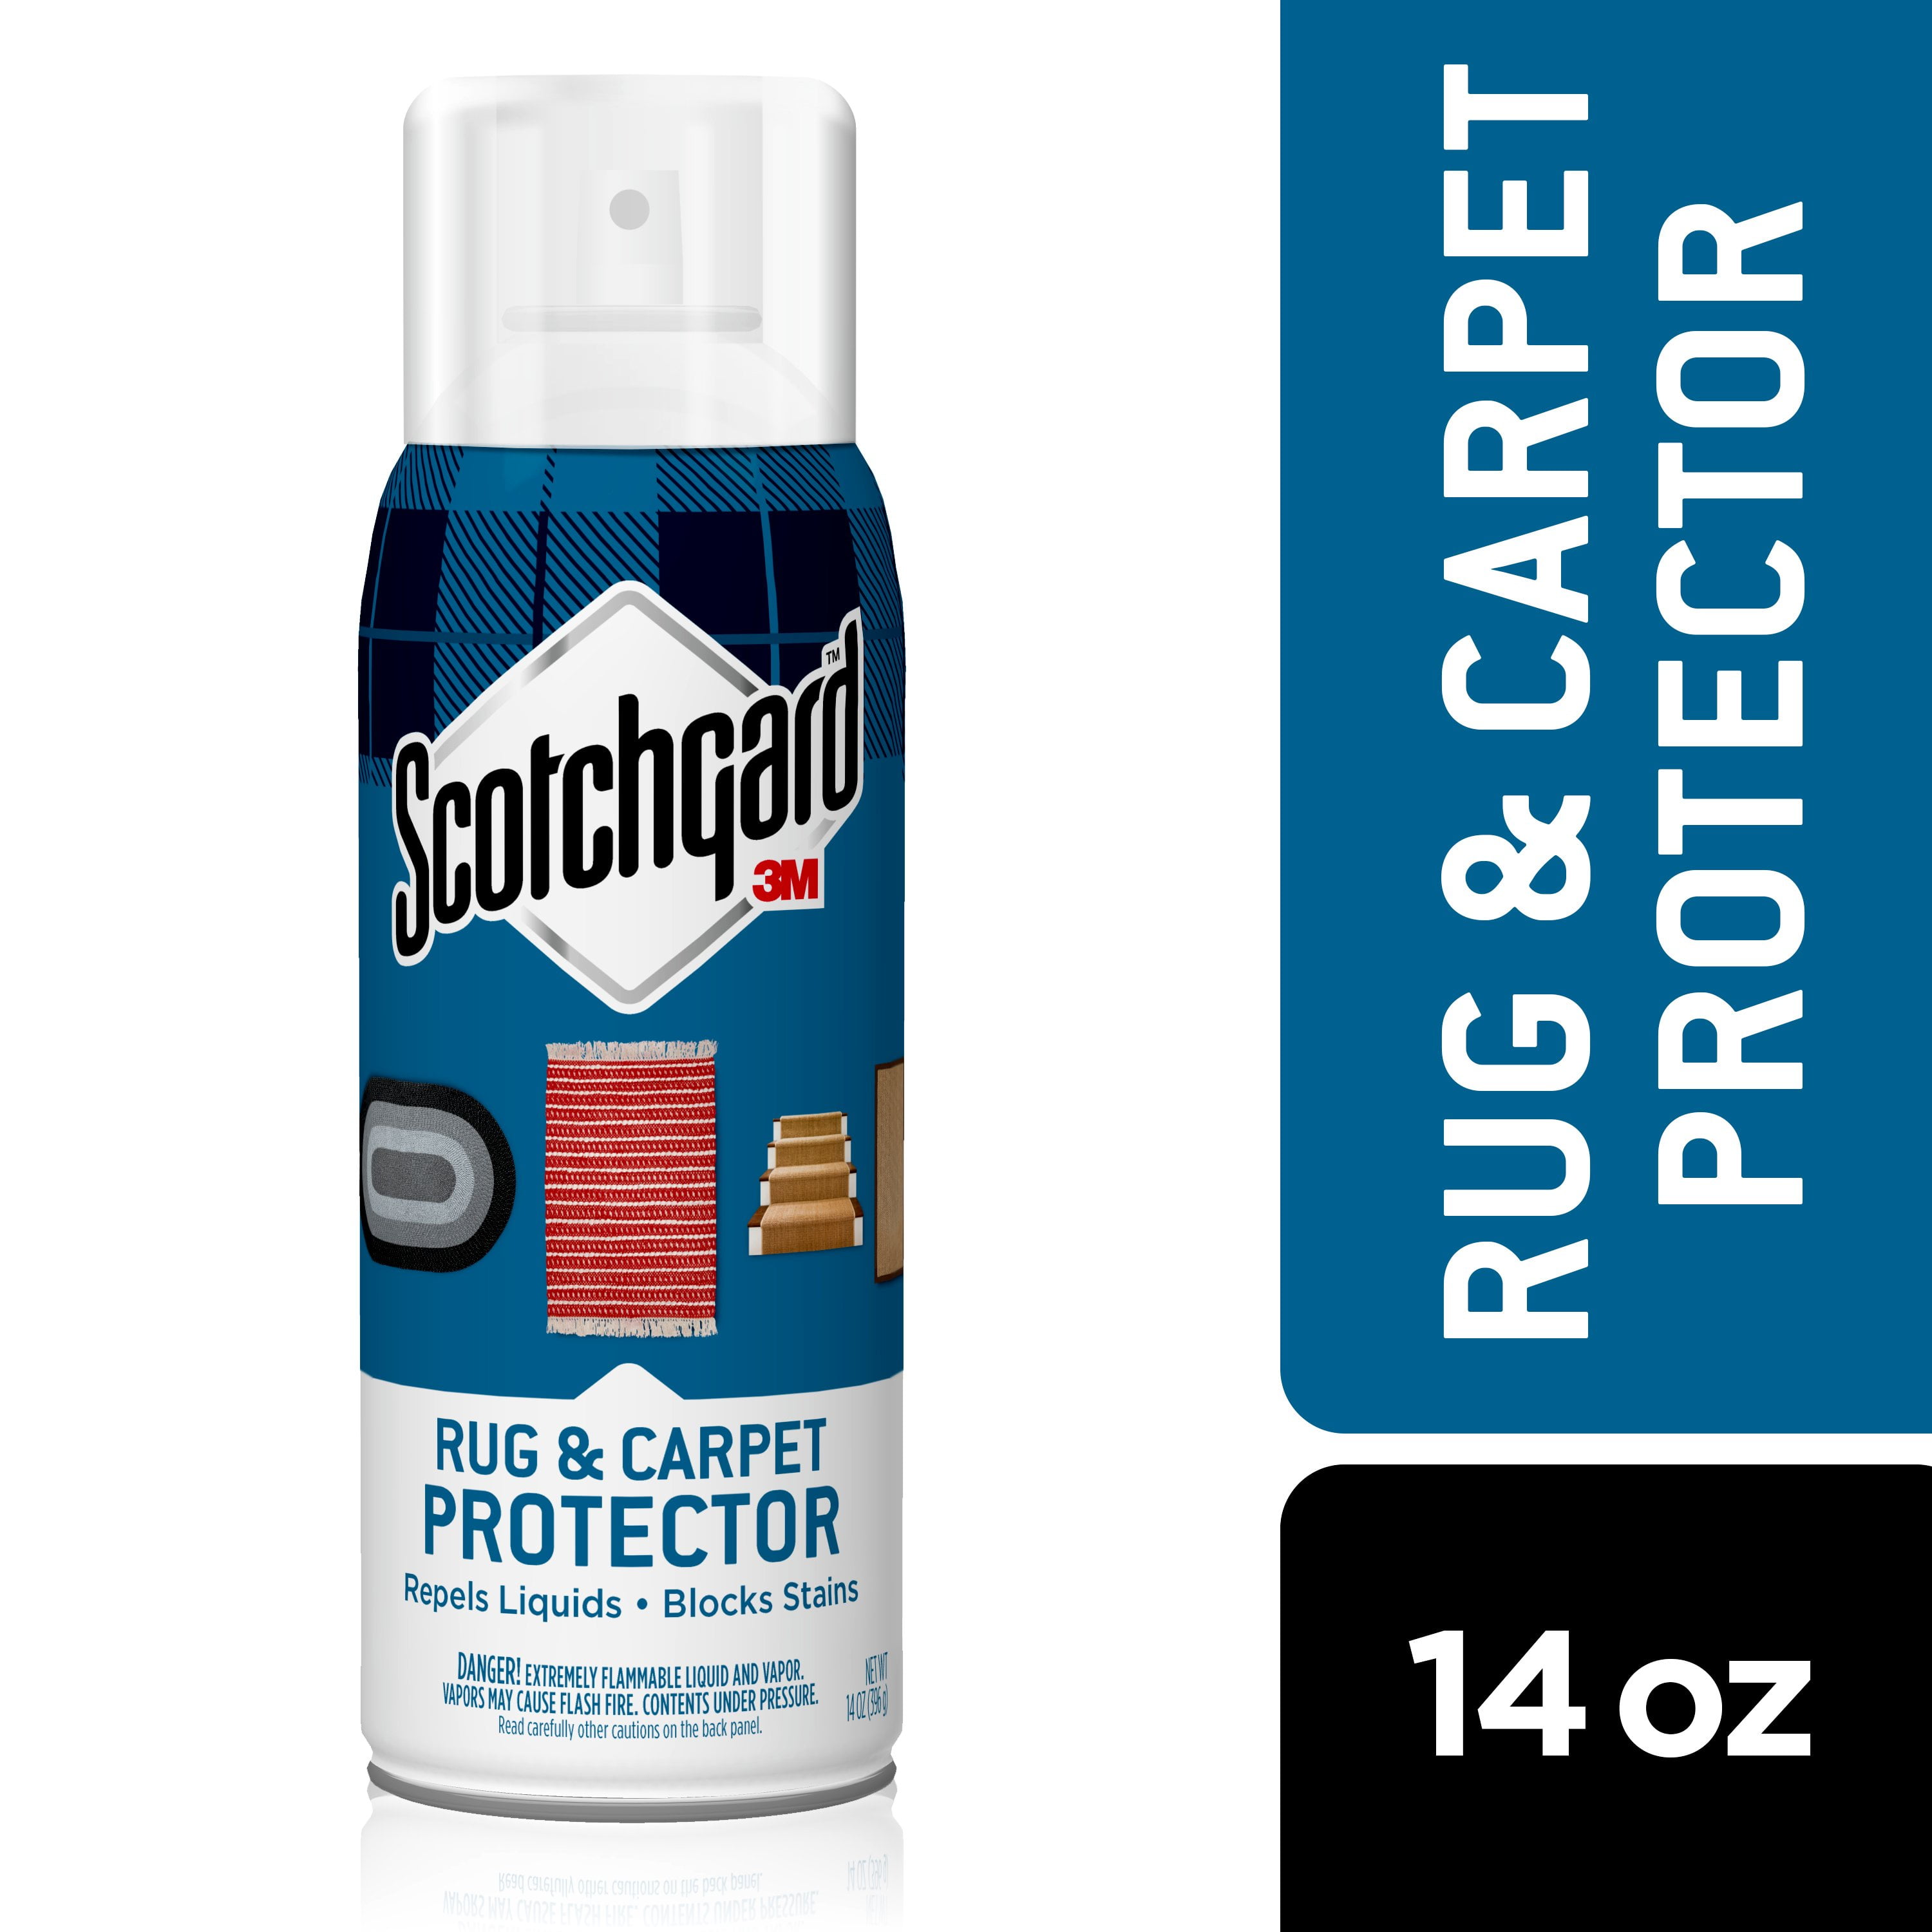 SANDI'S RUG & CARPET STAIN PROTECTOR PRO STRENGTH 400 gms CAN 